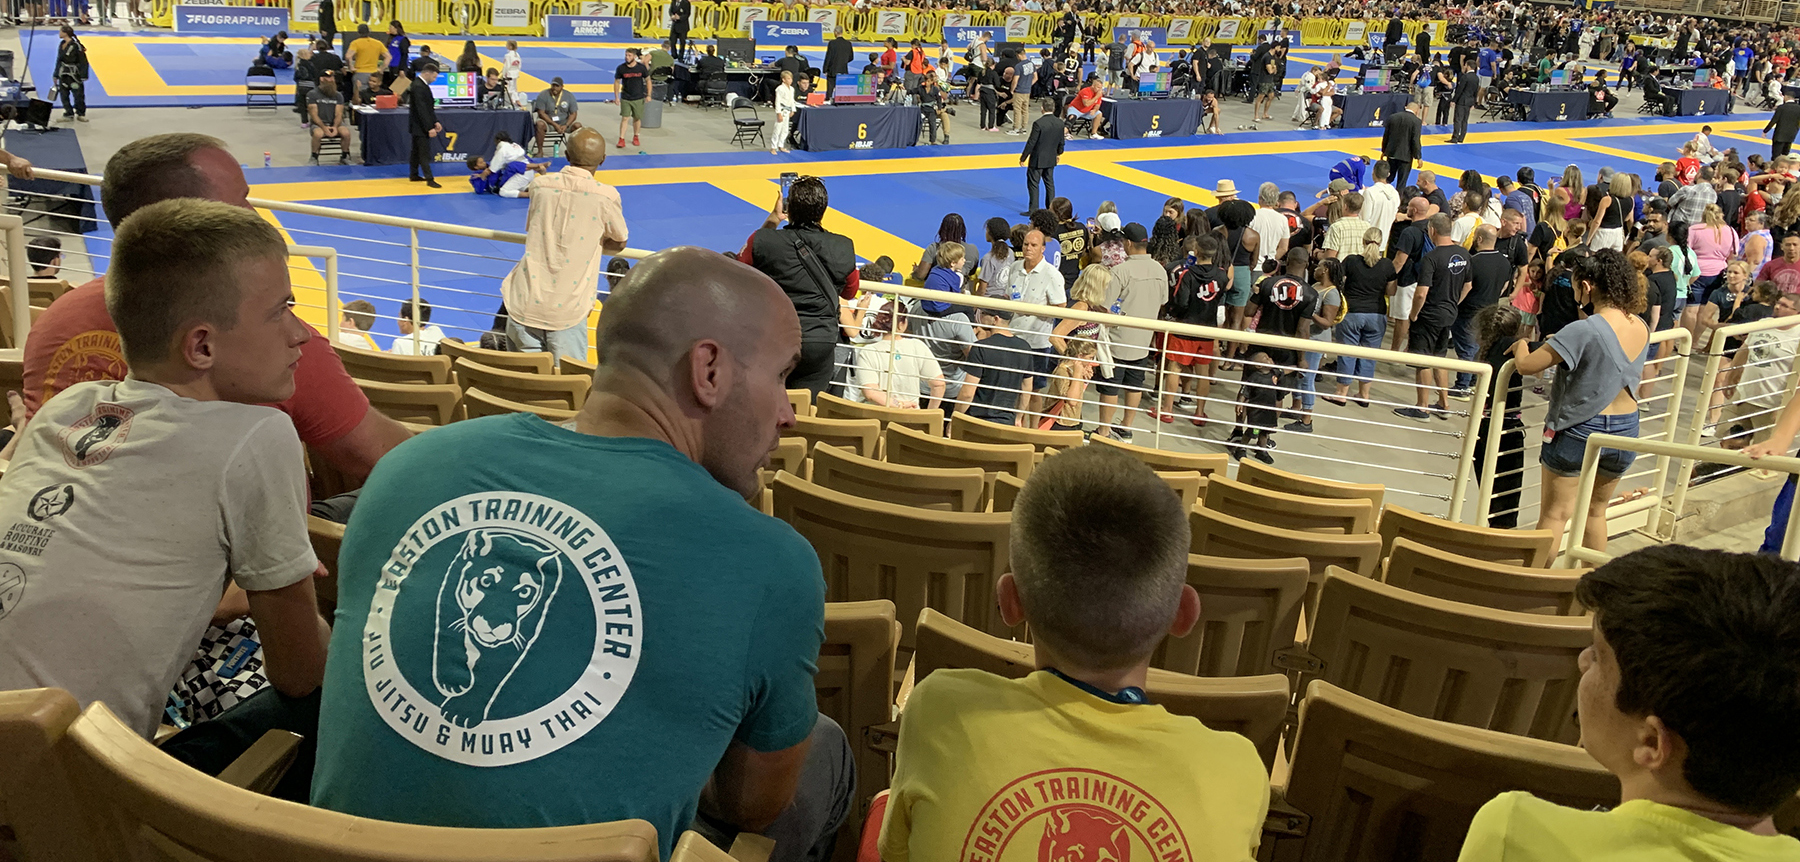 An image of a Coach and his student at a Youth Brazilian Jiu-Jitsu competition.